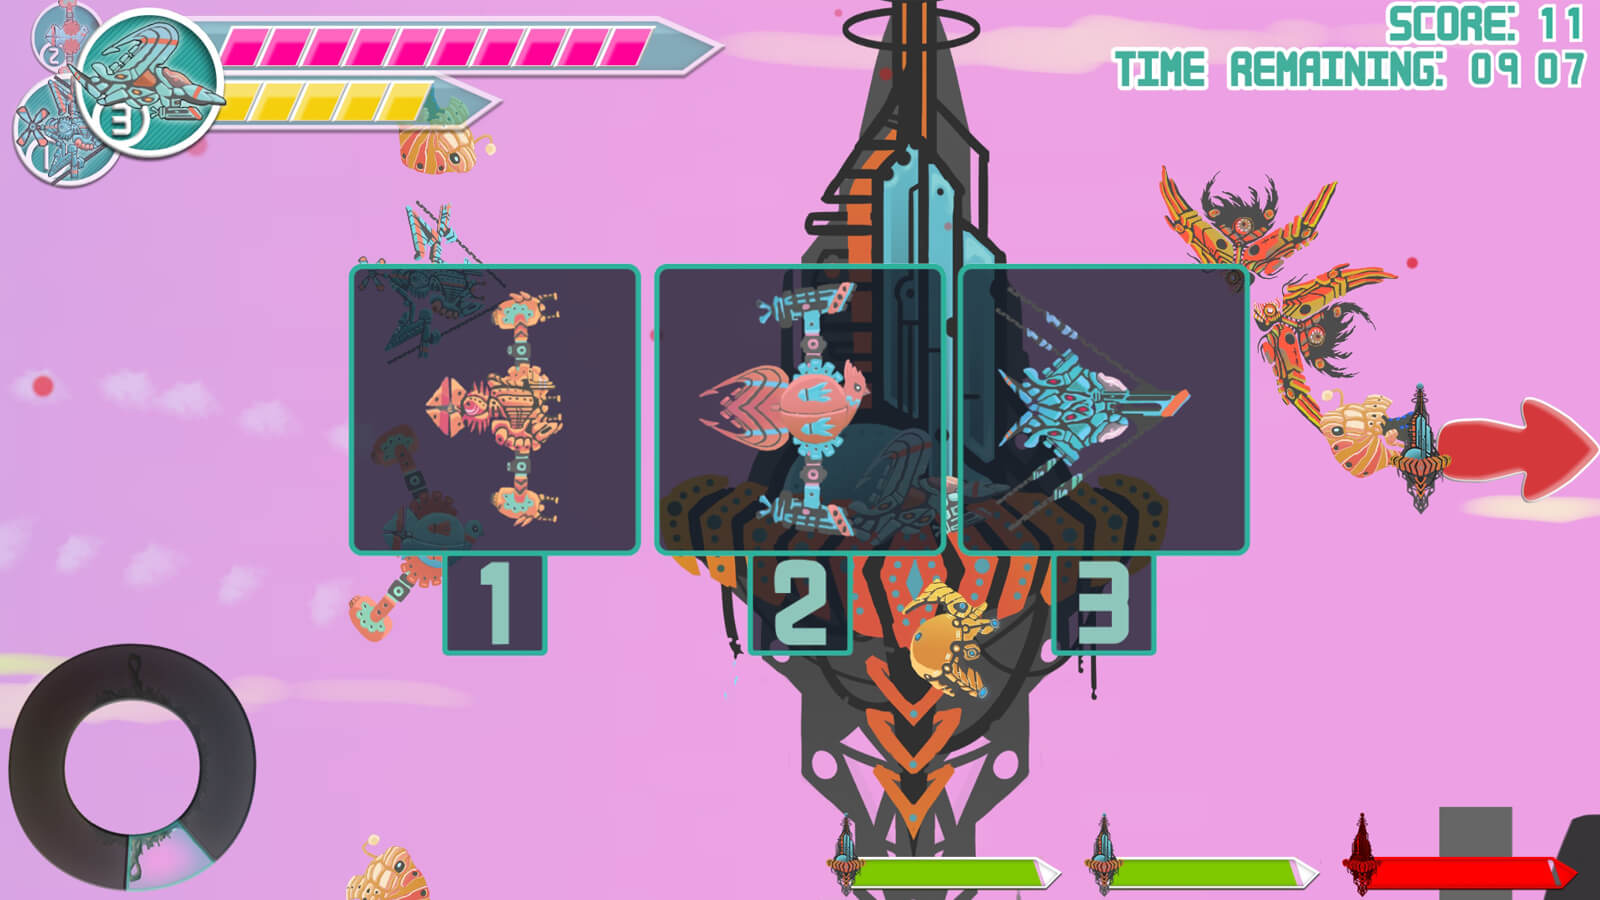 A selection screen showing the three alien spaceships the player can choose from. 